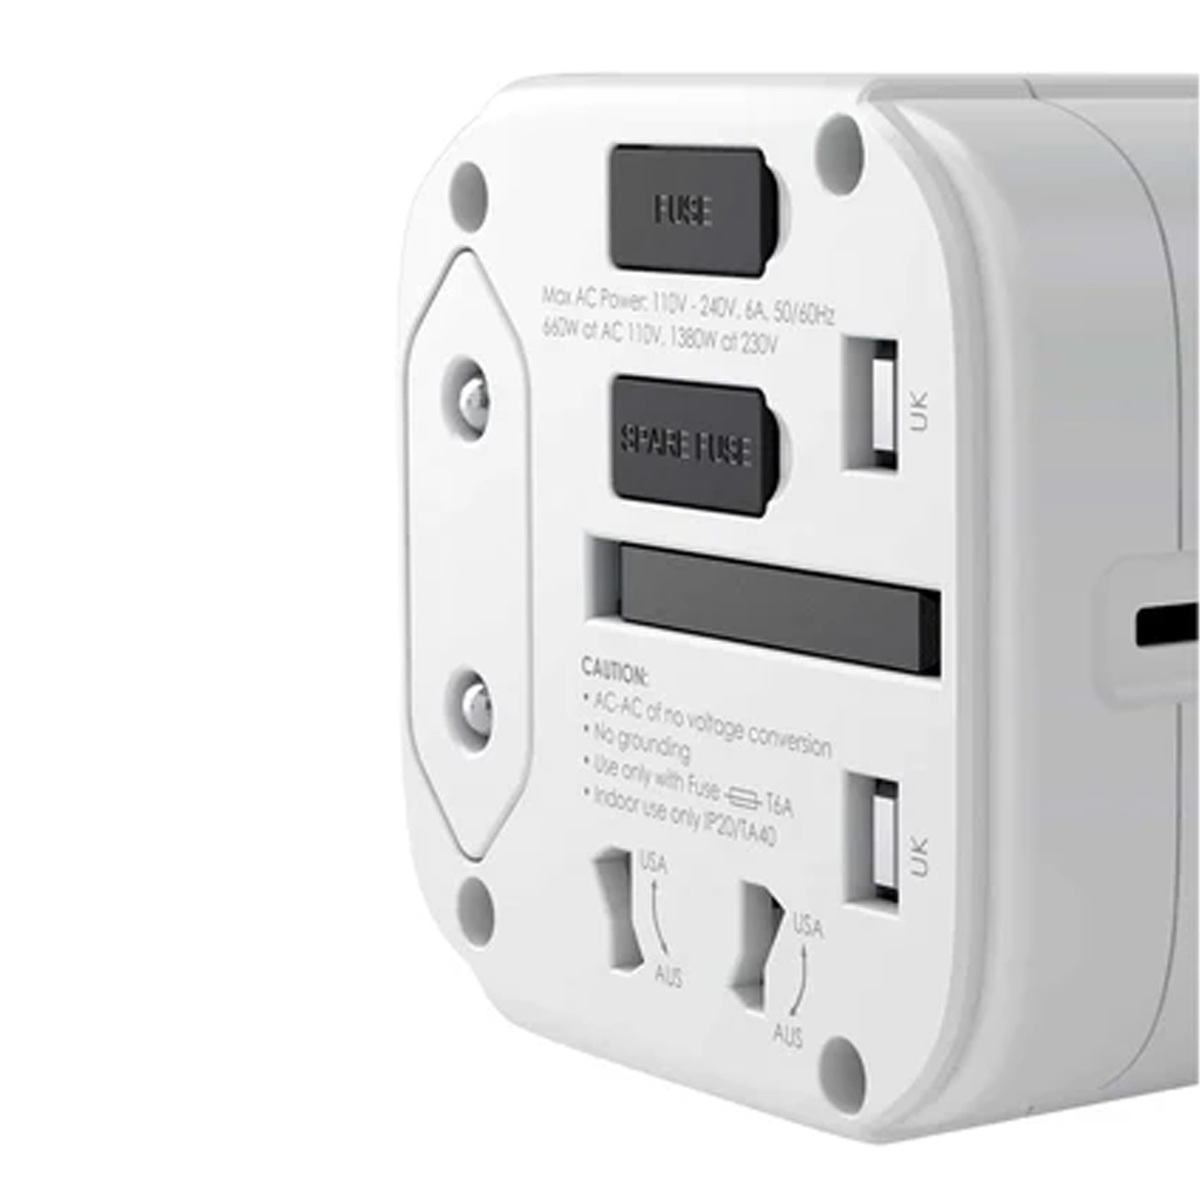 Aukey Universal Travel Adapter with USB-C and USB-A Ports, White, PATA01